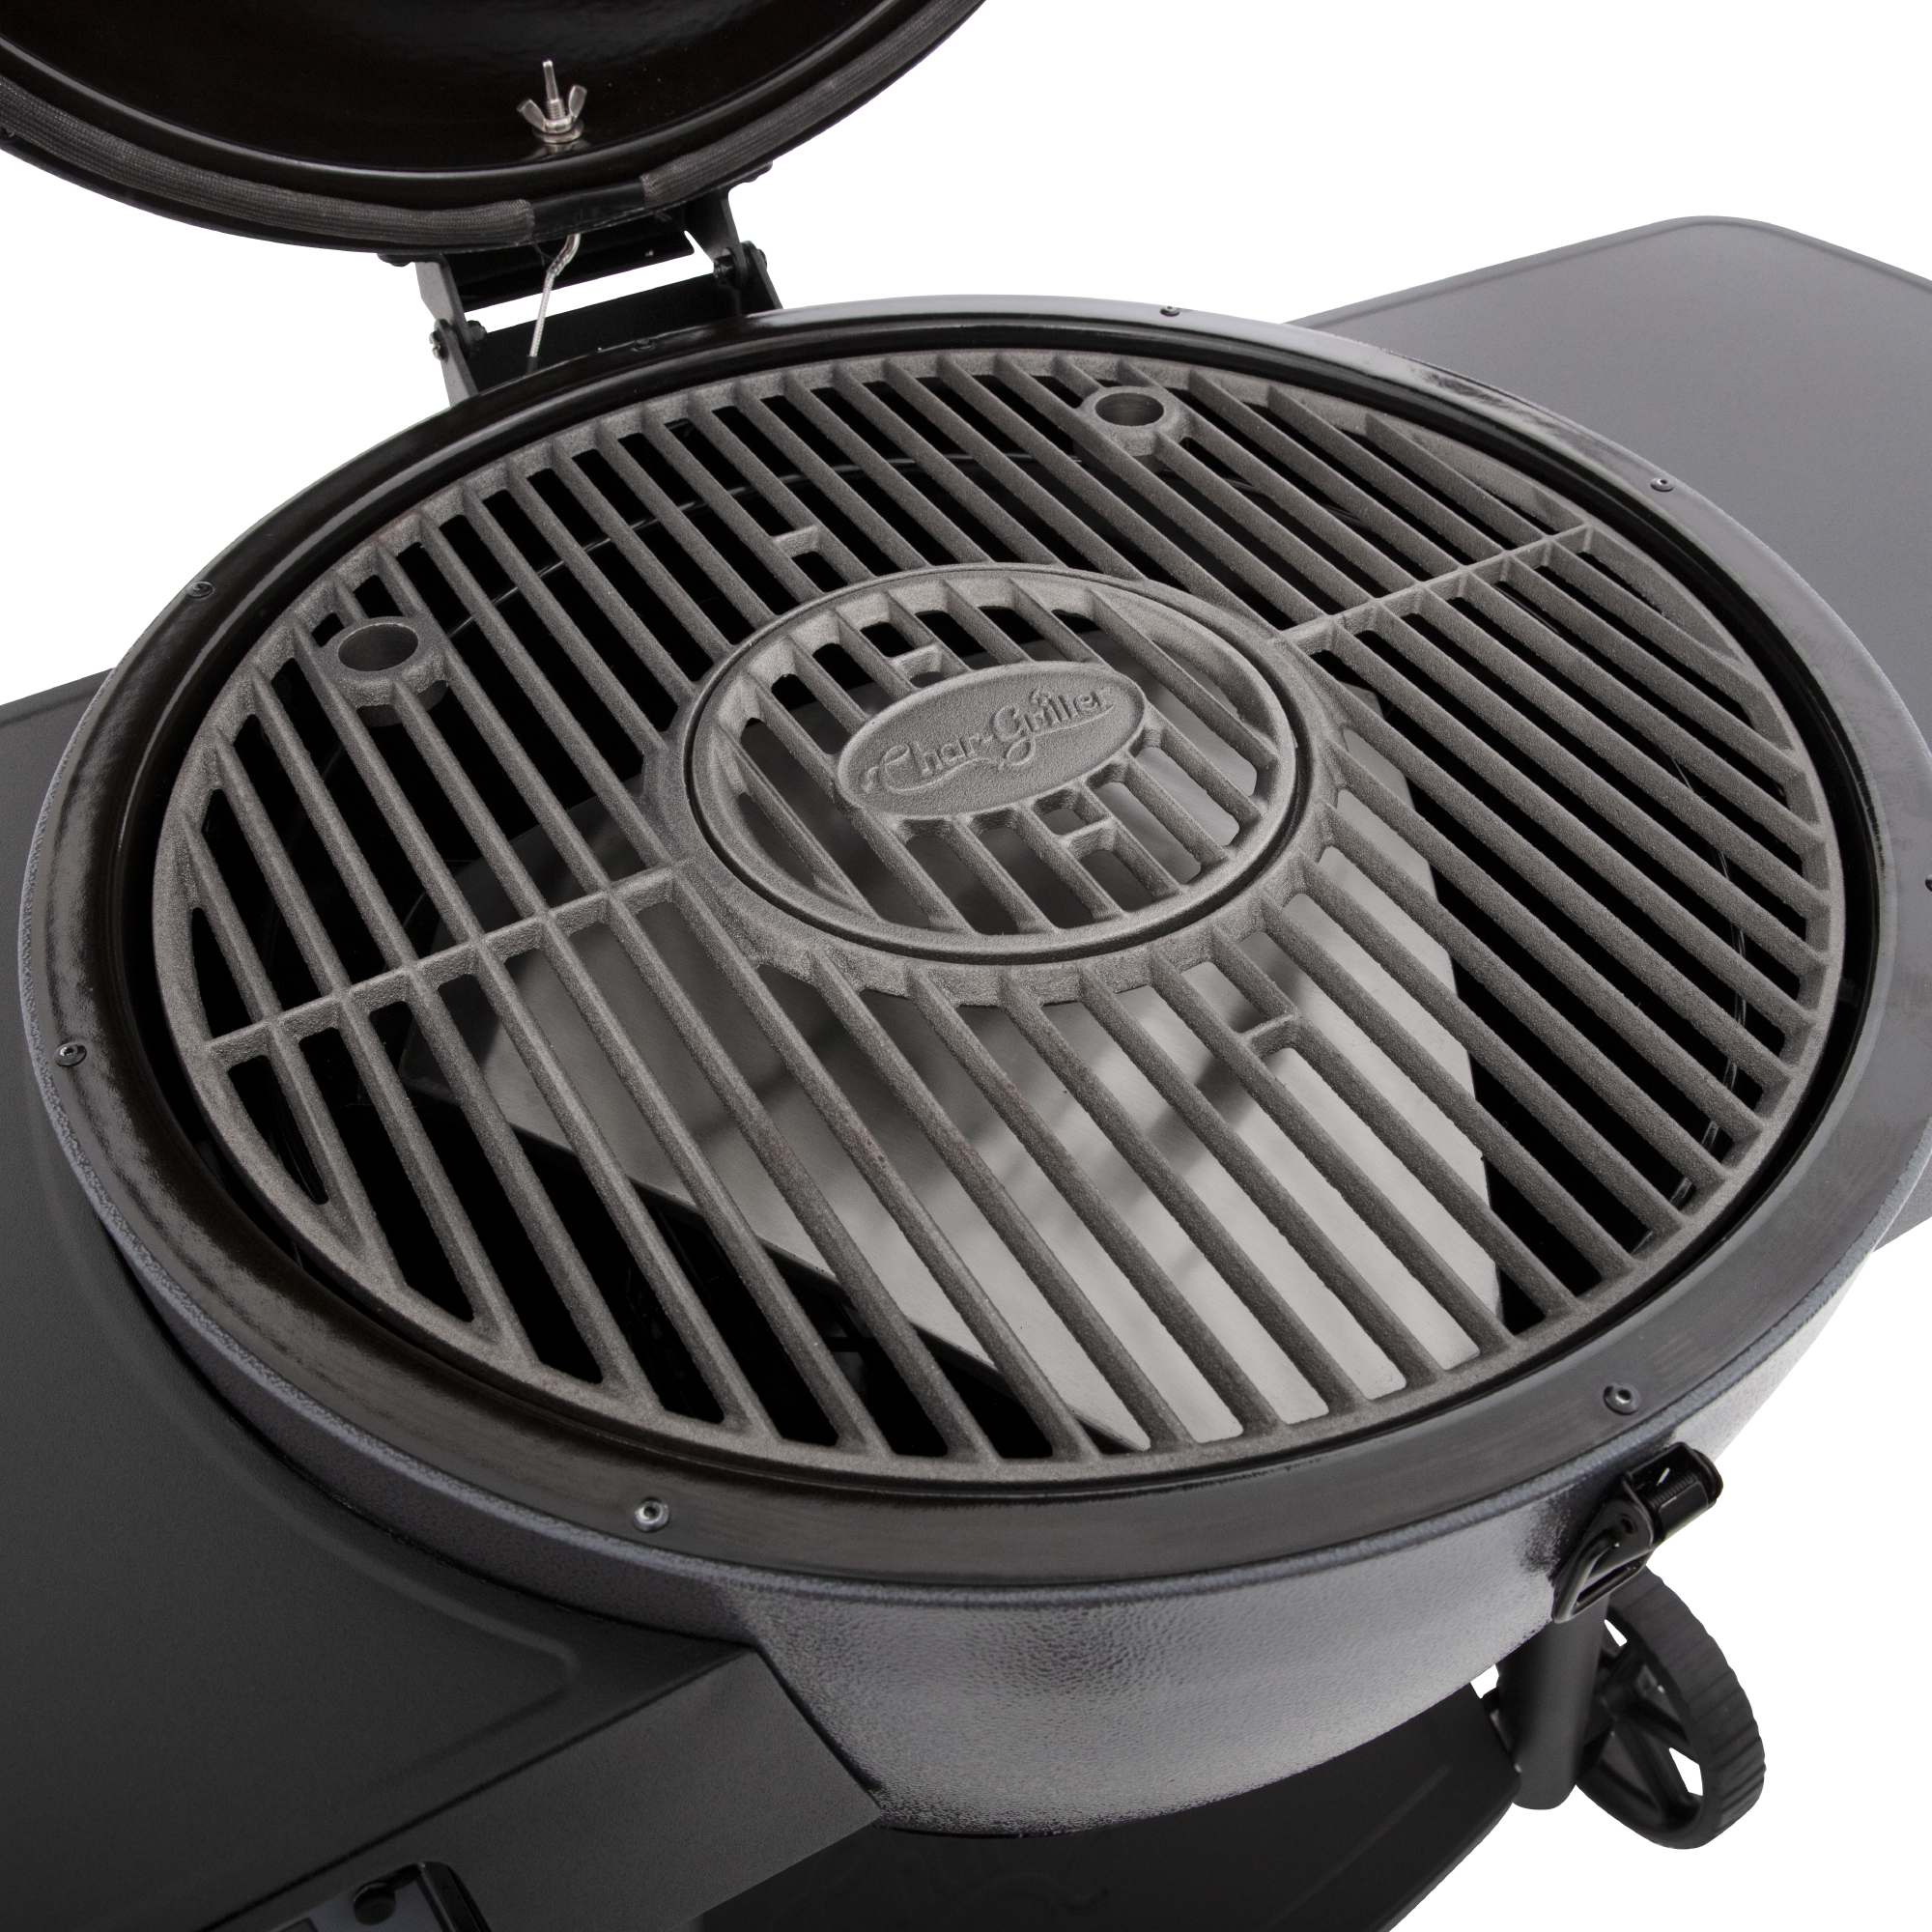 Auto Kamado Charcoal Grill in Gray - image 5 of 15